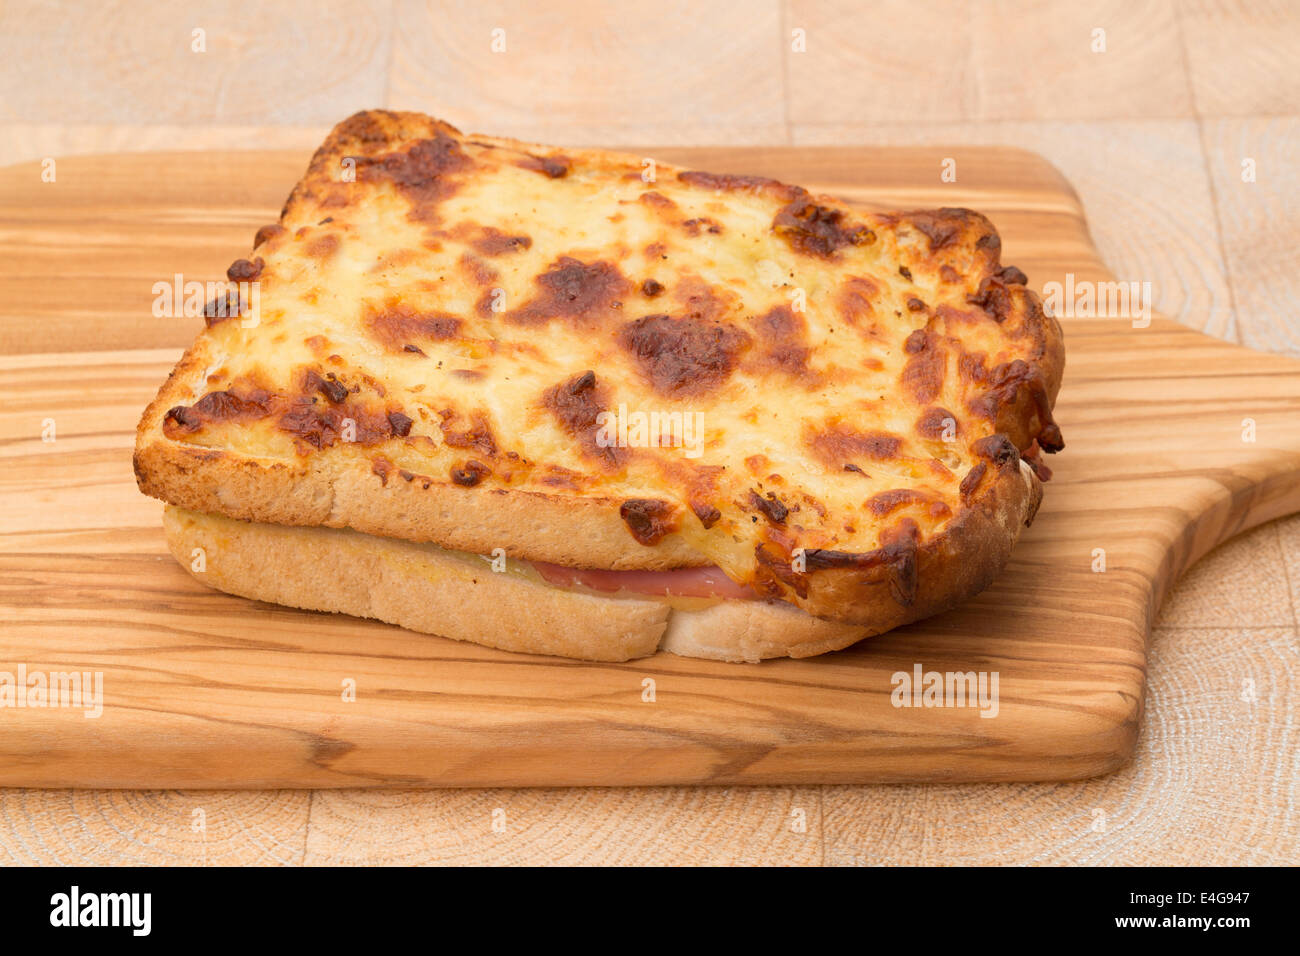 A toasted cheese and ham sandwich or panini - studio shot Stock Photo